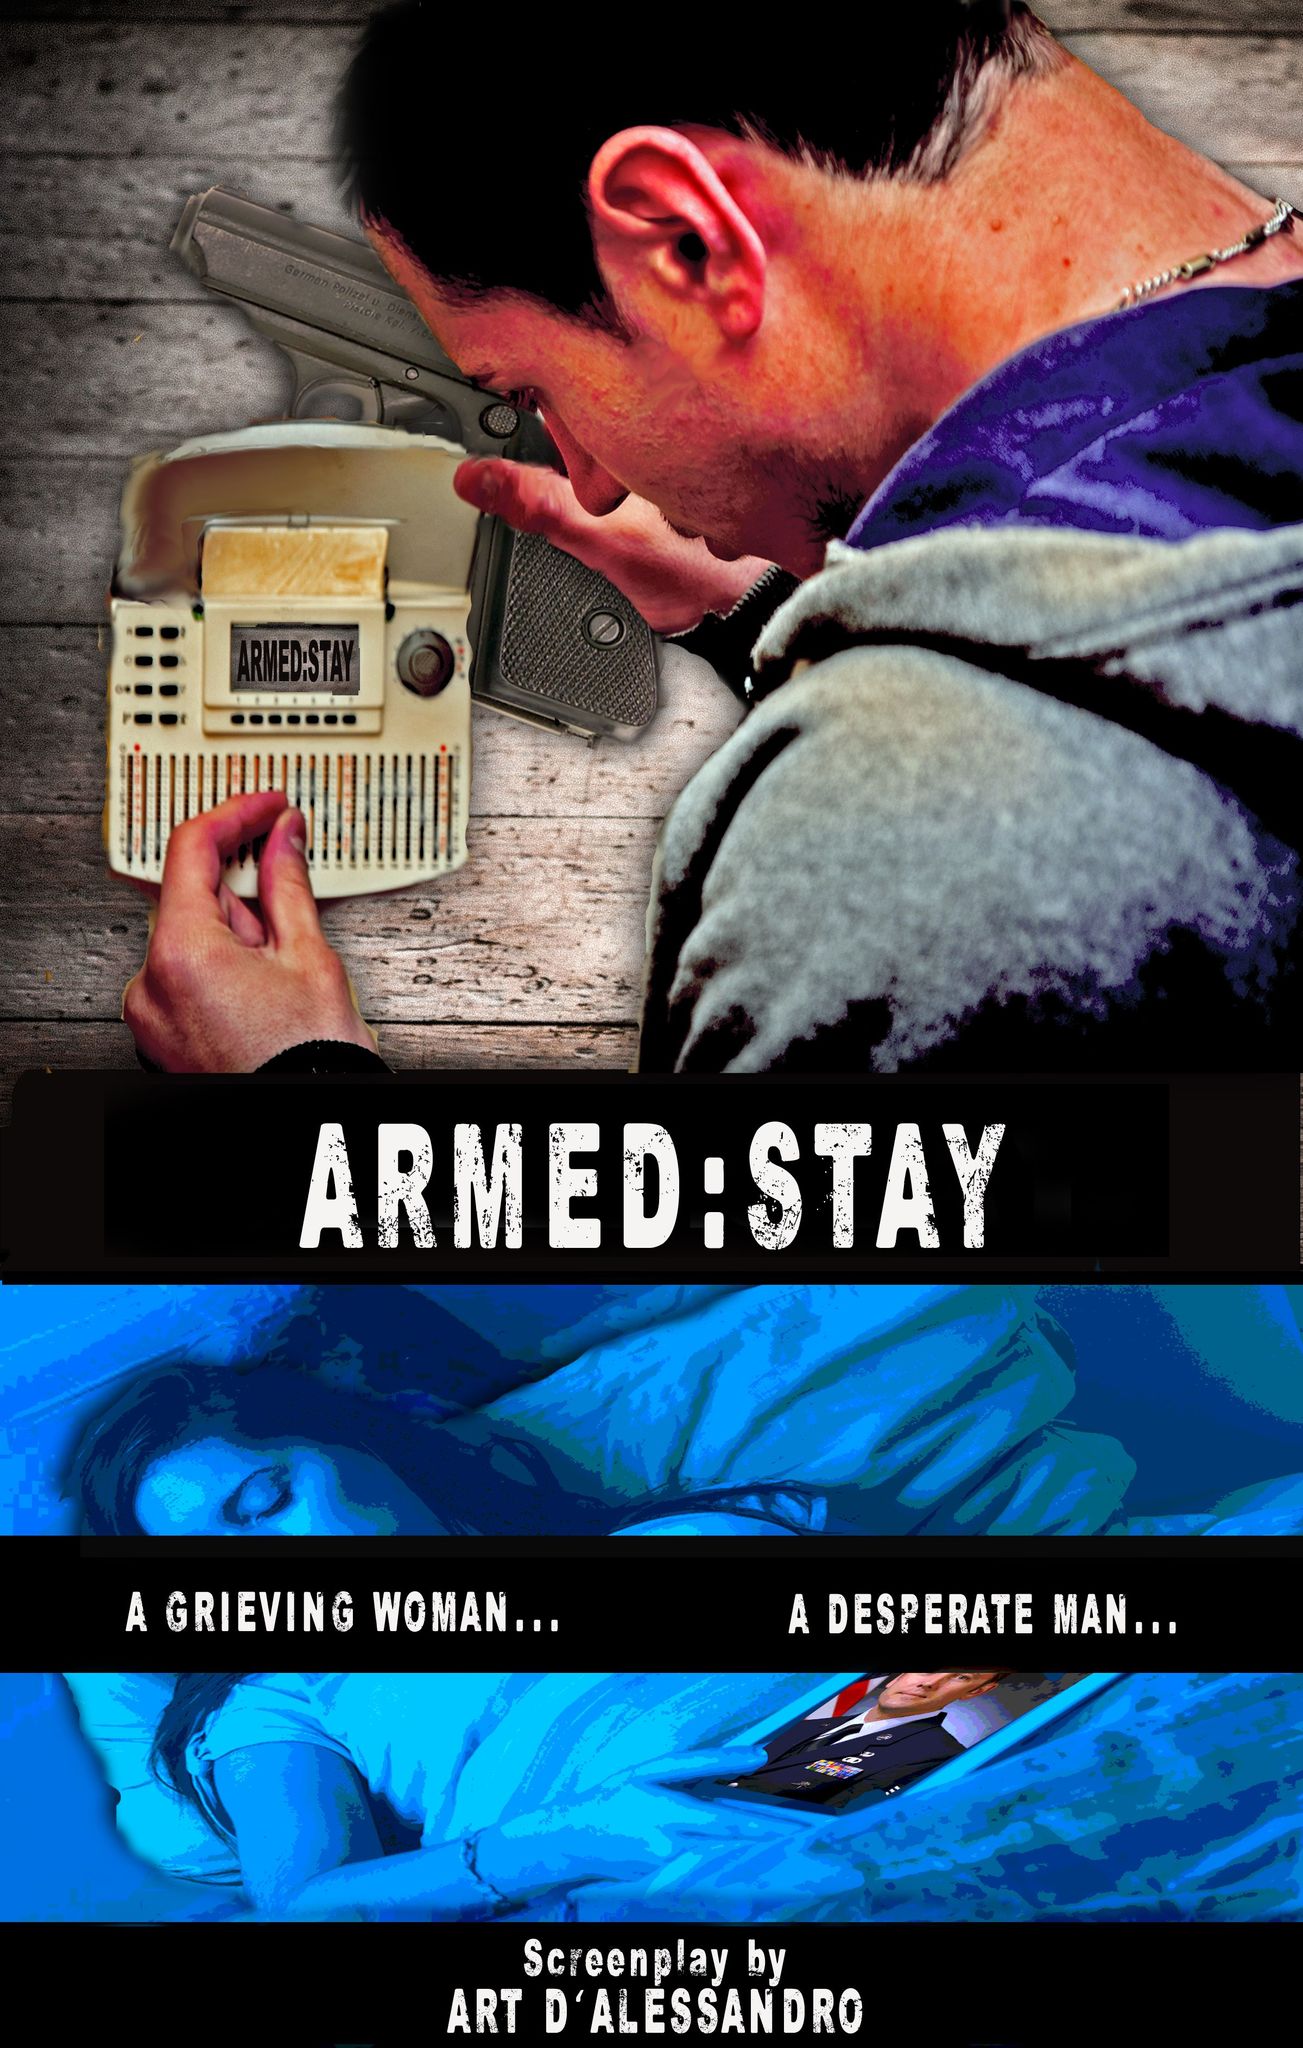  ARMED:STAY